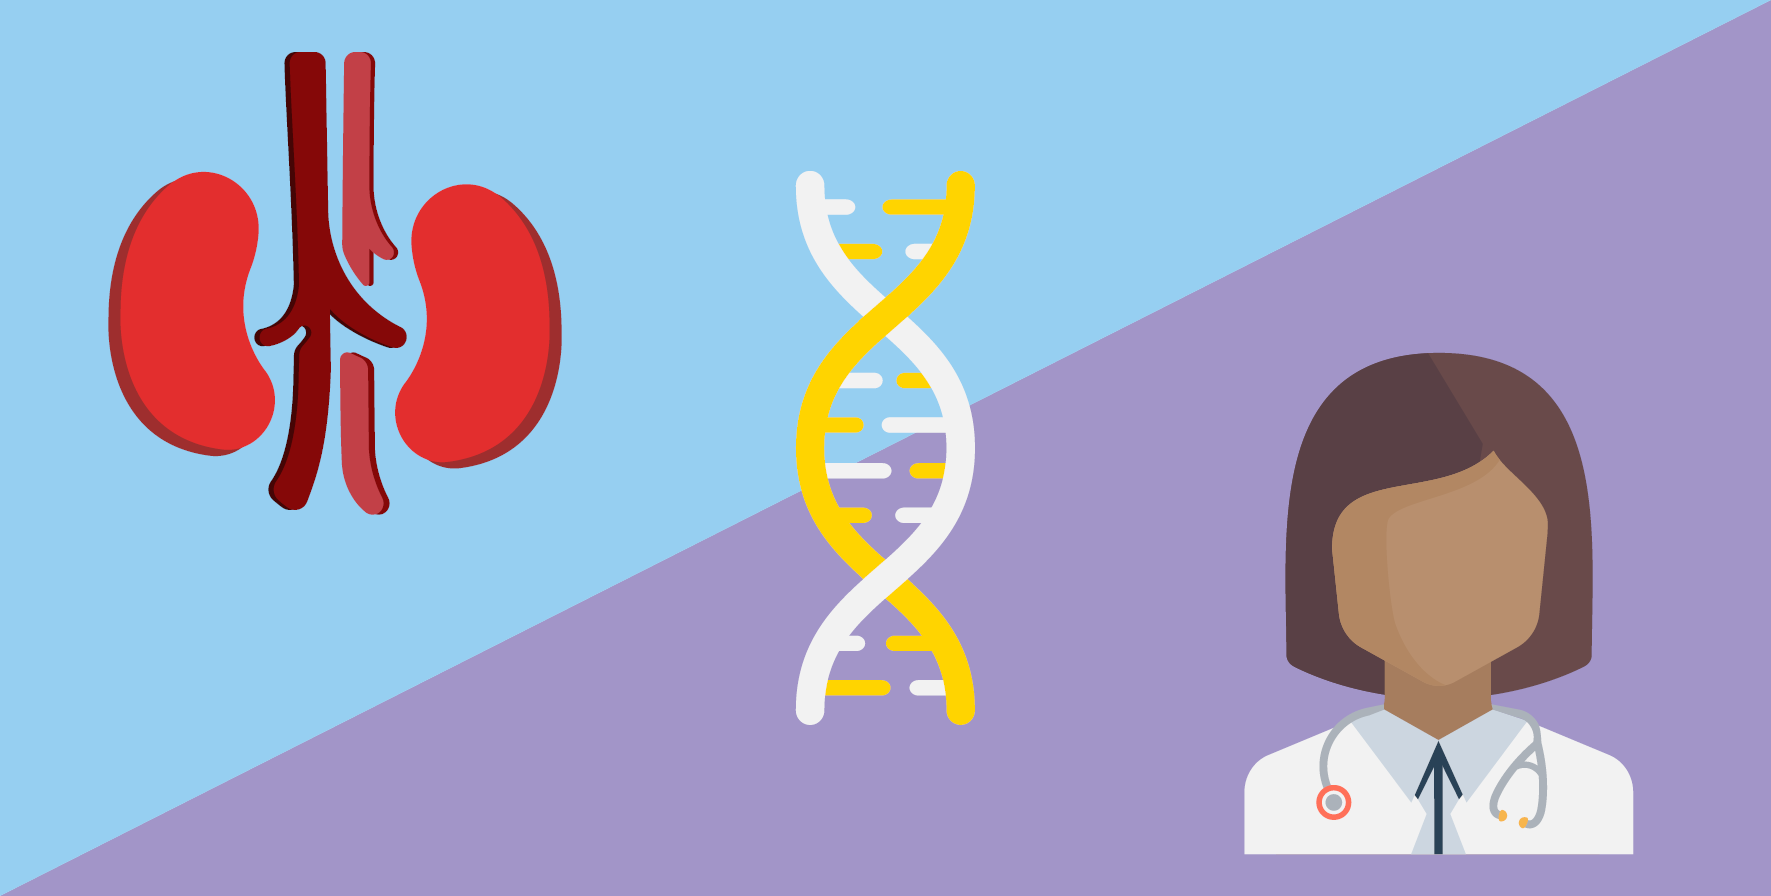 Illustration of kidneys on the left, DNA helix in the middle, and female doctor on the right.